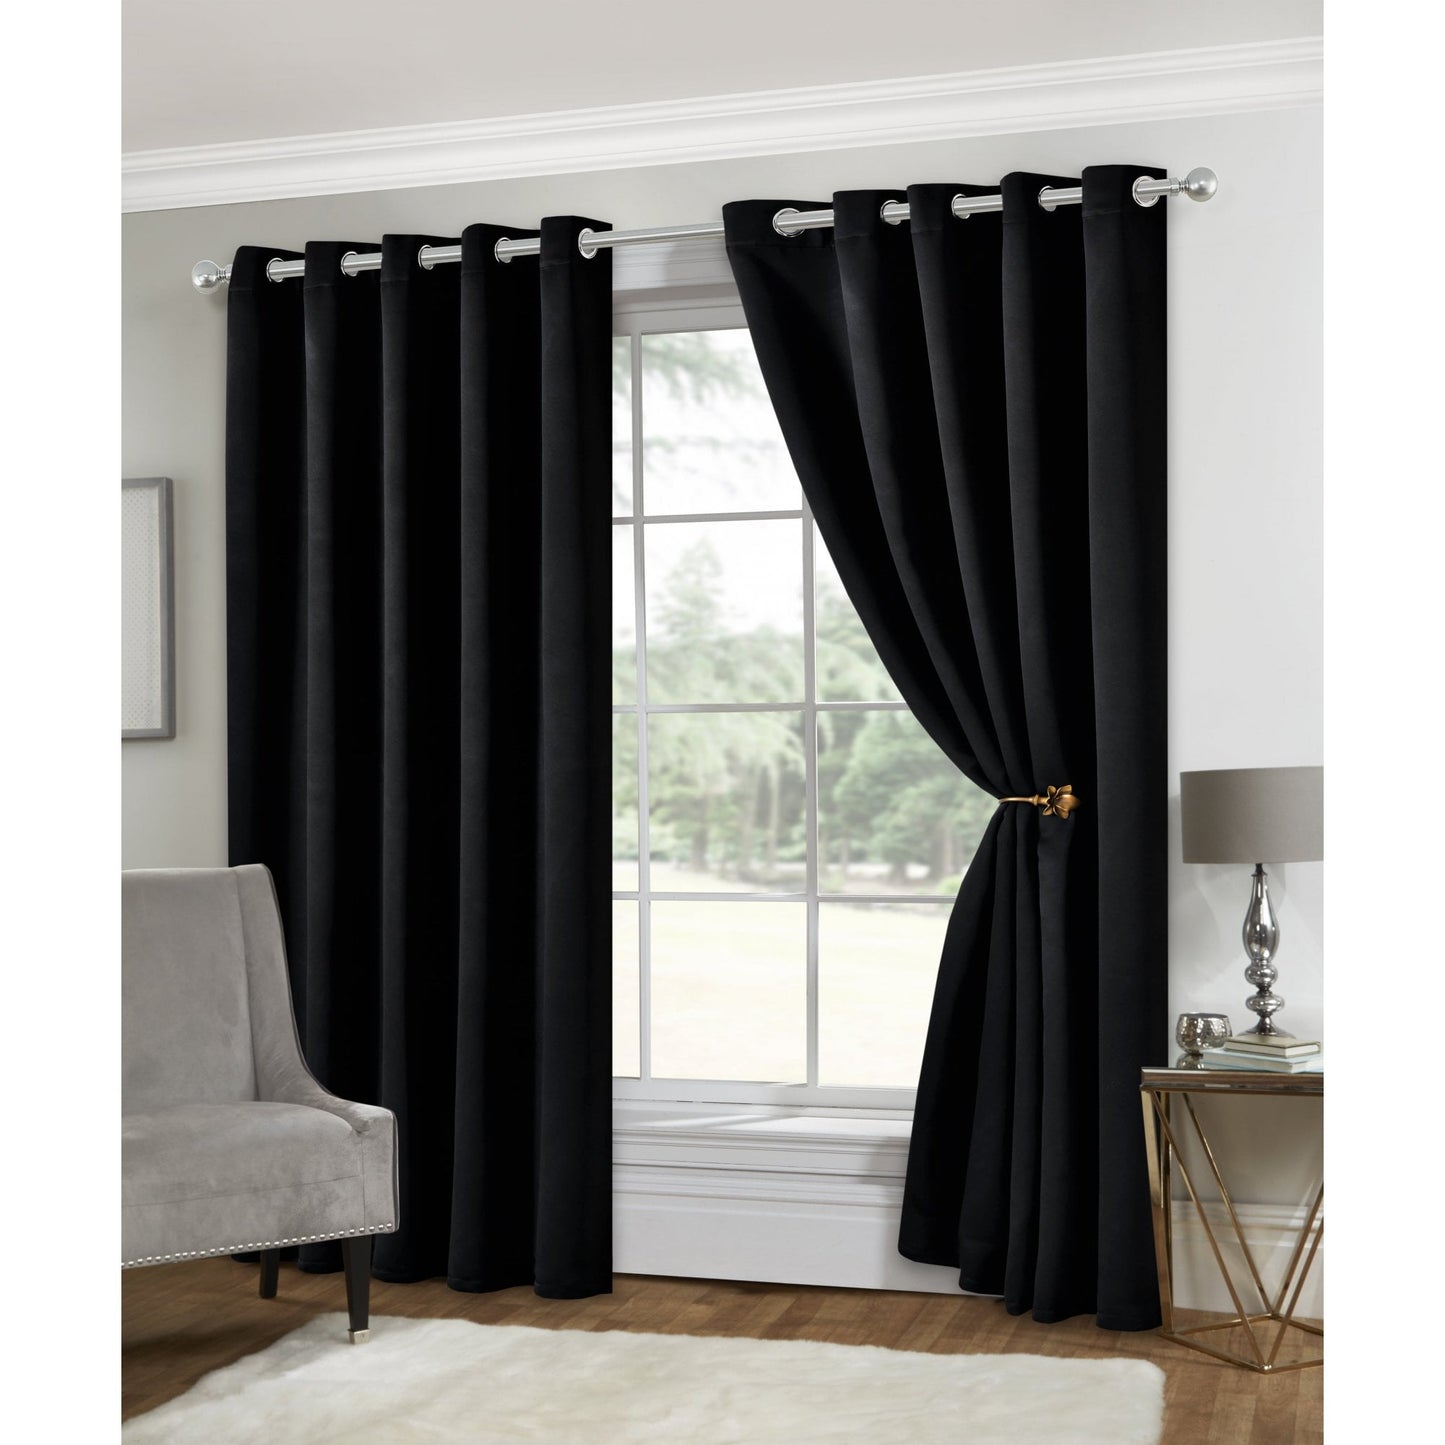 Eclipse Soft Touch Blockout Eyelet Curtains - Black